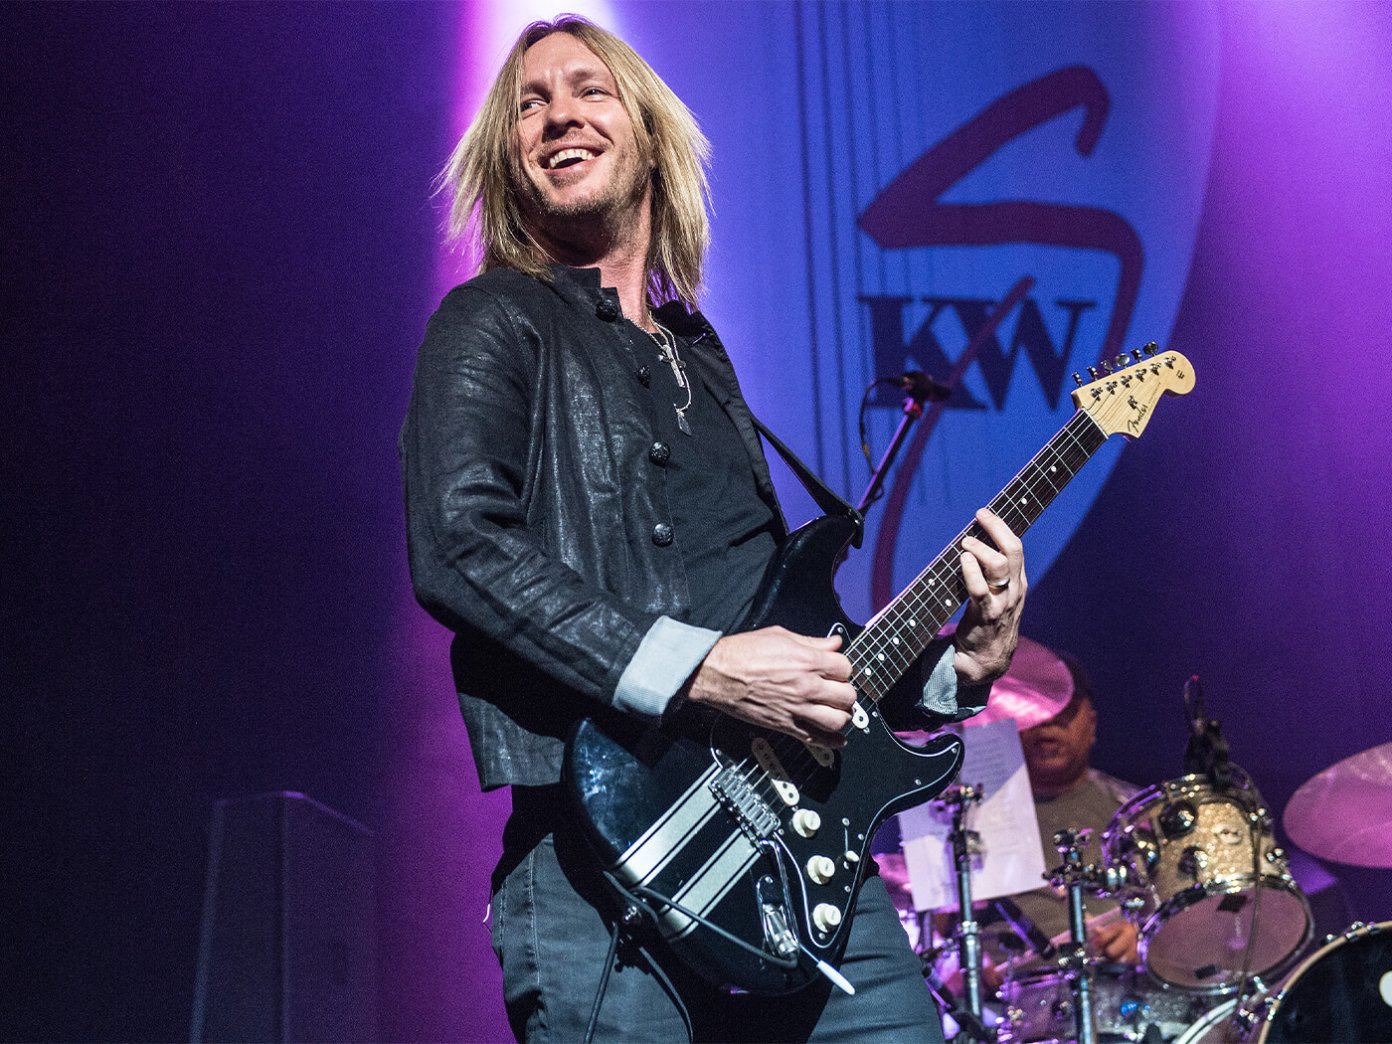 Kenny Wayne Shepherd band announce first live concert video feature